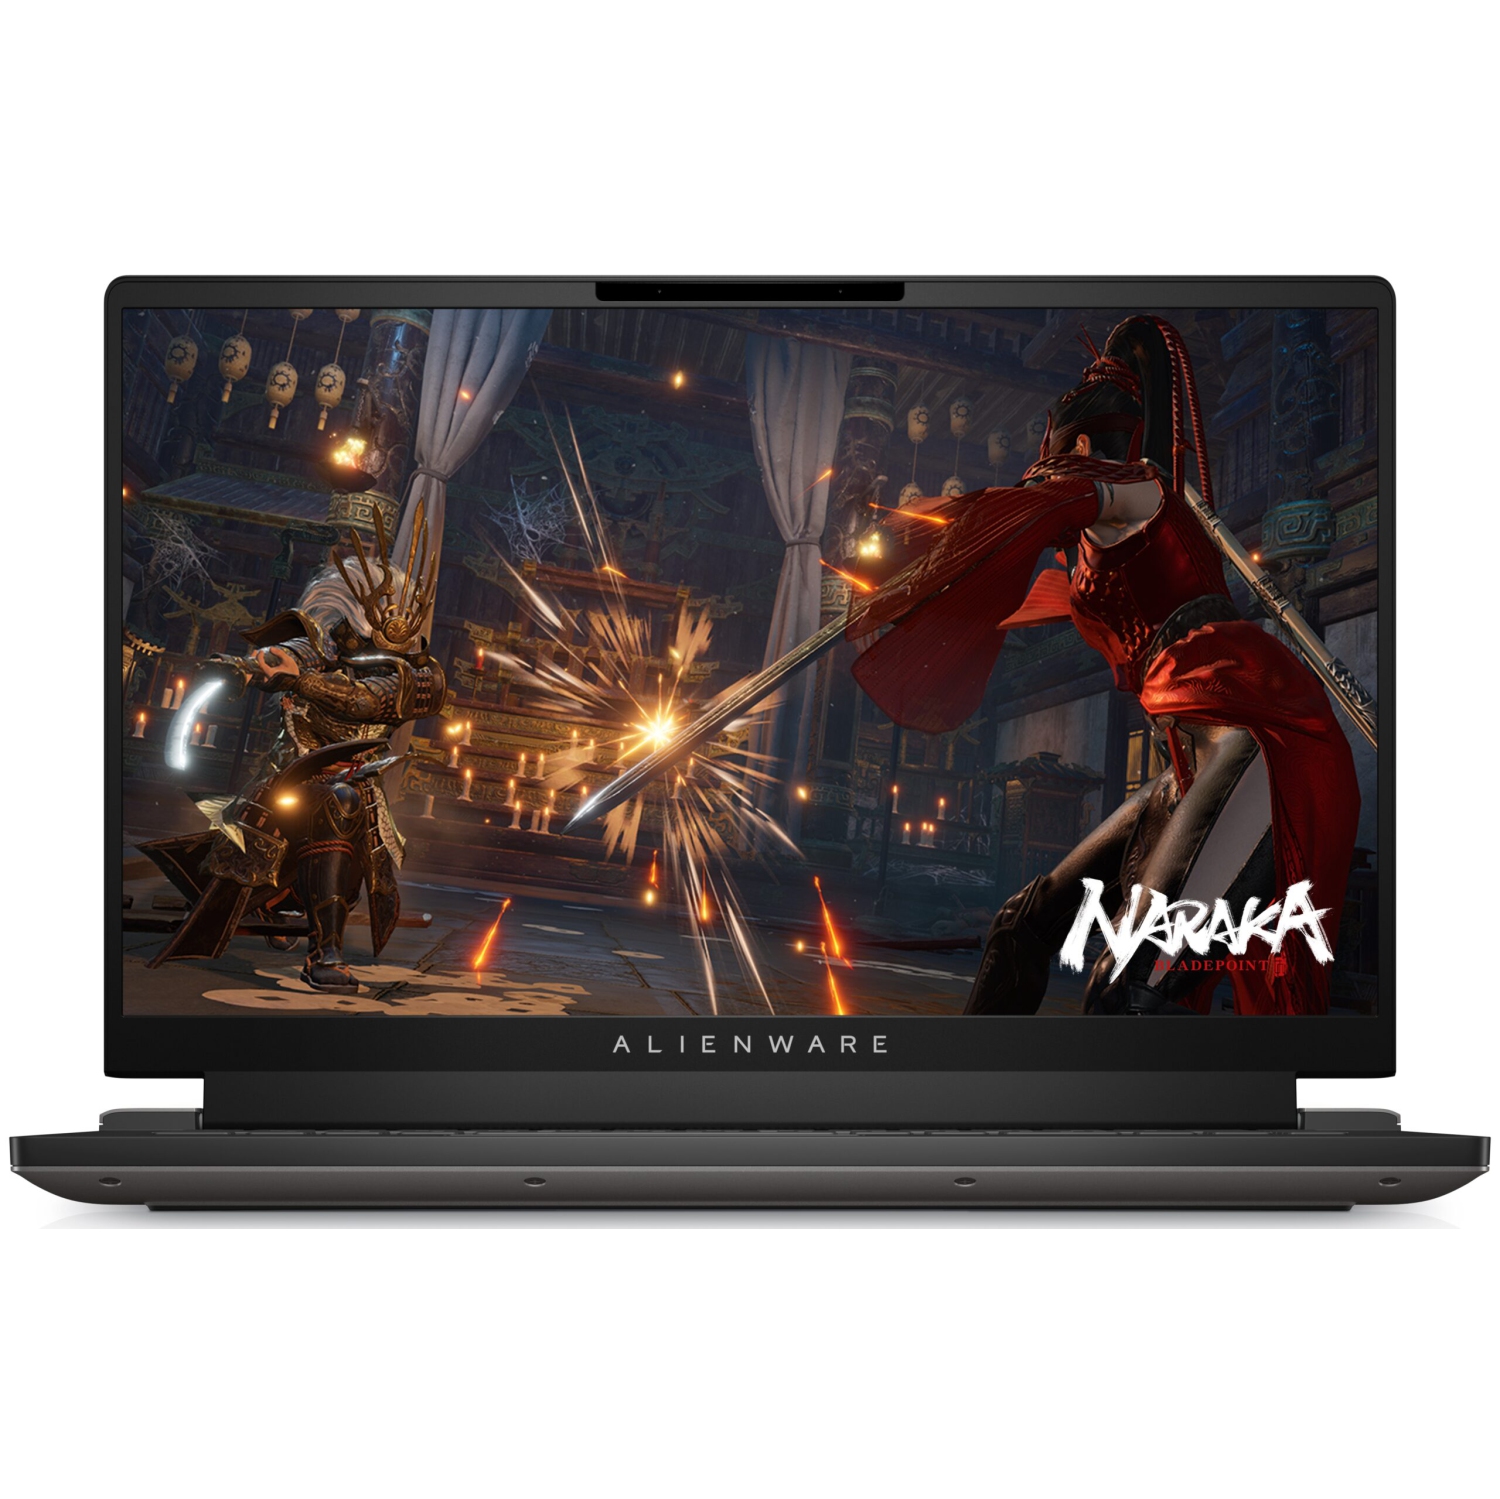 Refurbished (Excellent) - Alienware m15 R7 15.6" Gaming Notebook Intel i7-12700H 16 GB DDR5 512 GB NVMe RTX 3070 Ti Windows 11 Home 64-Bit